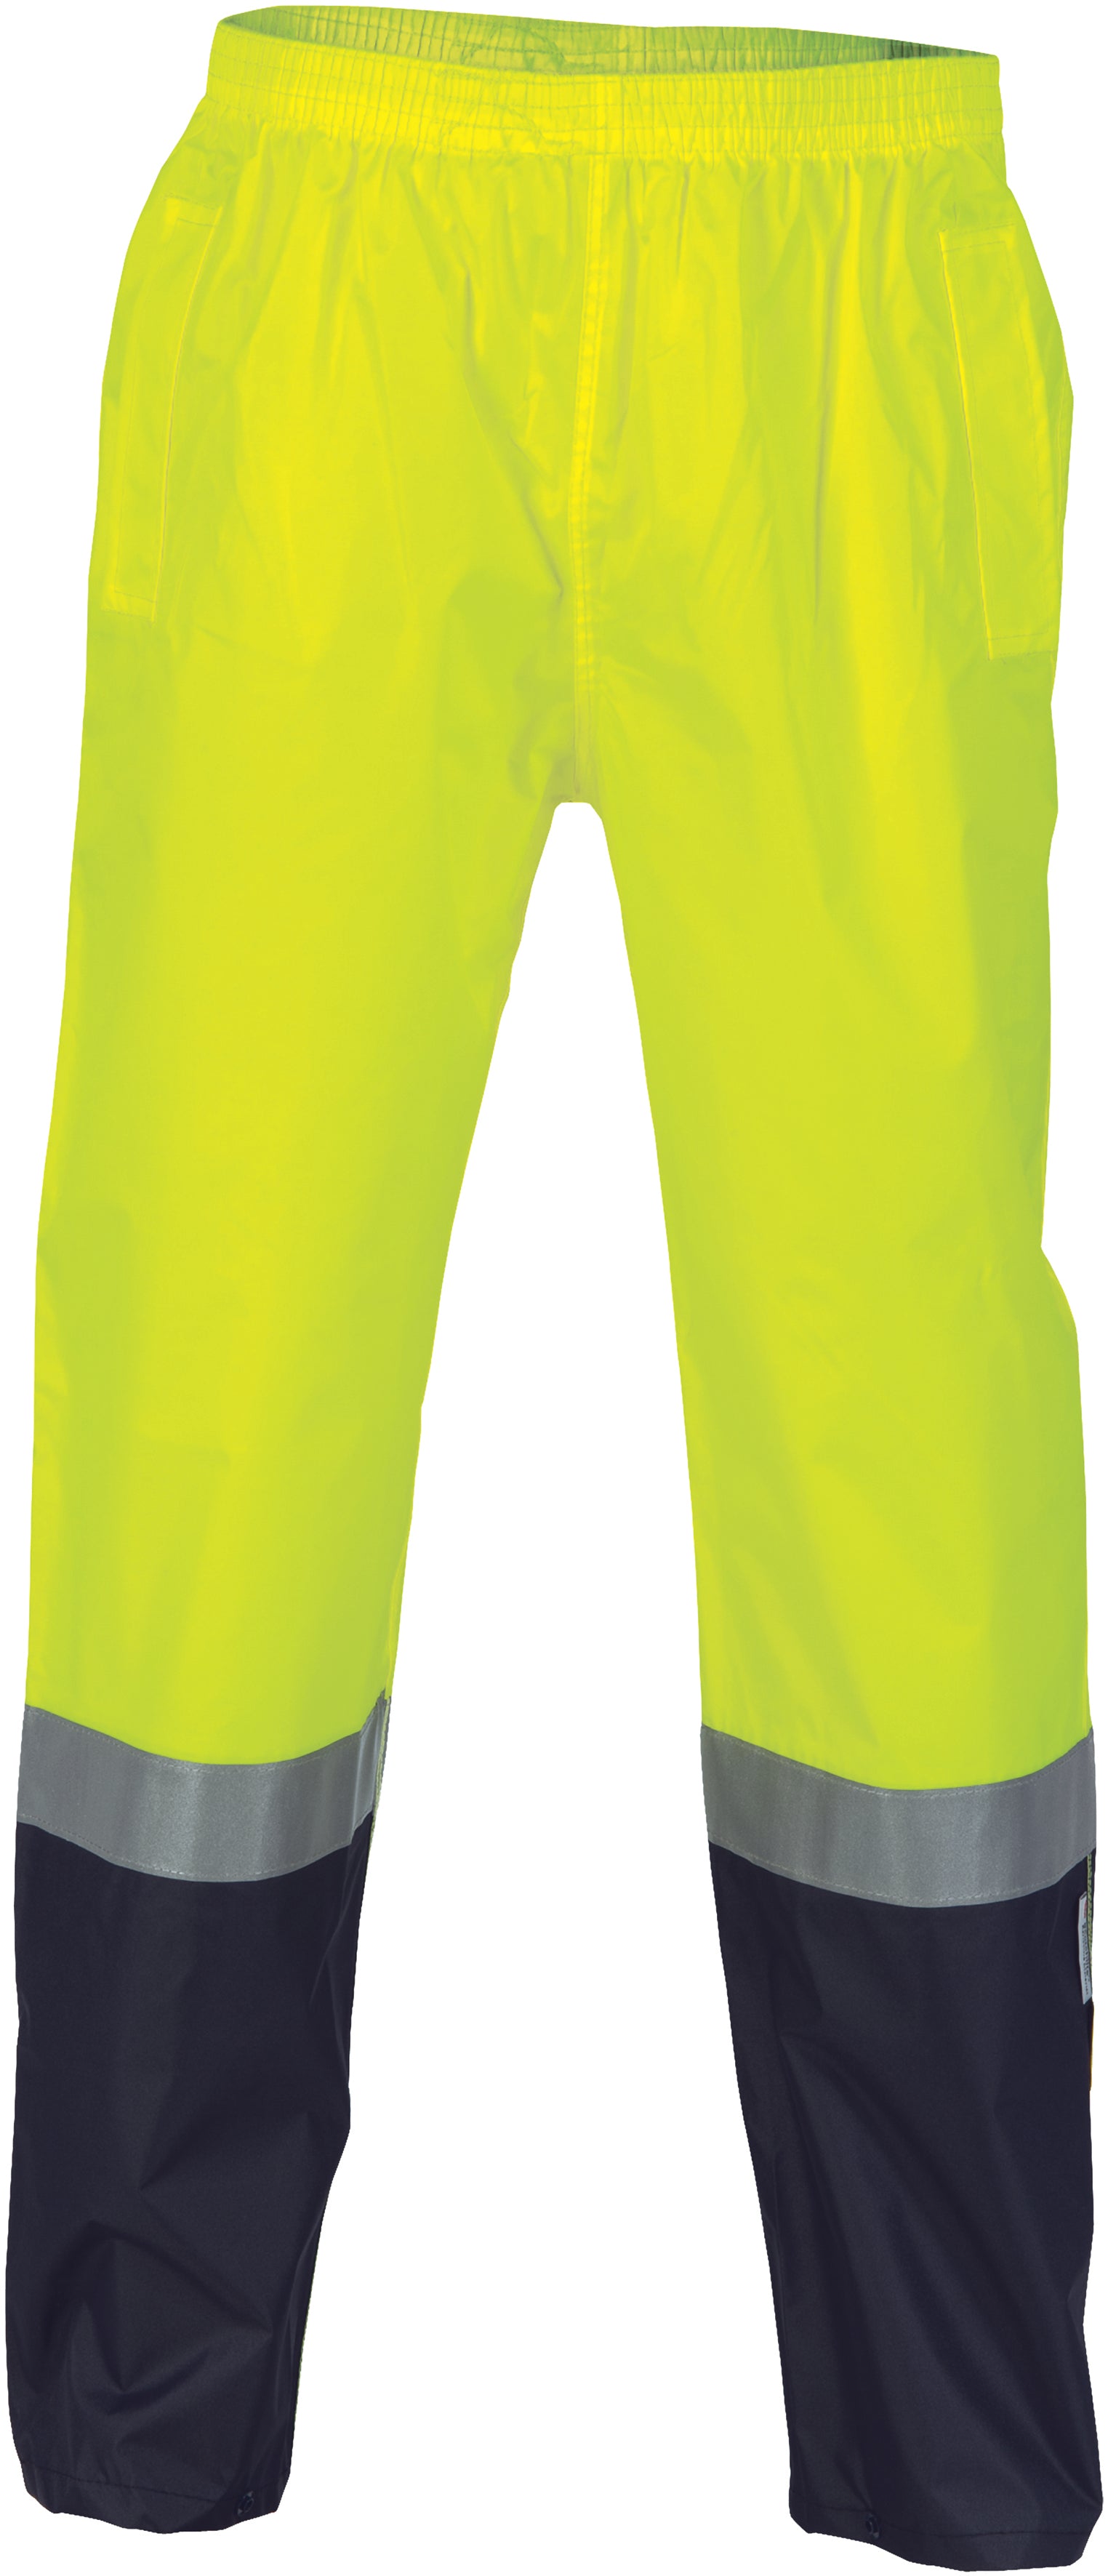 DNC - 3880 Two Tone Light Weight Rain Pants with CSR reflective tape